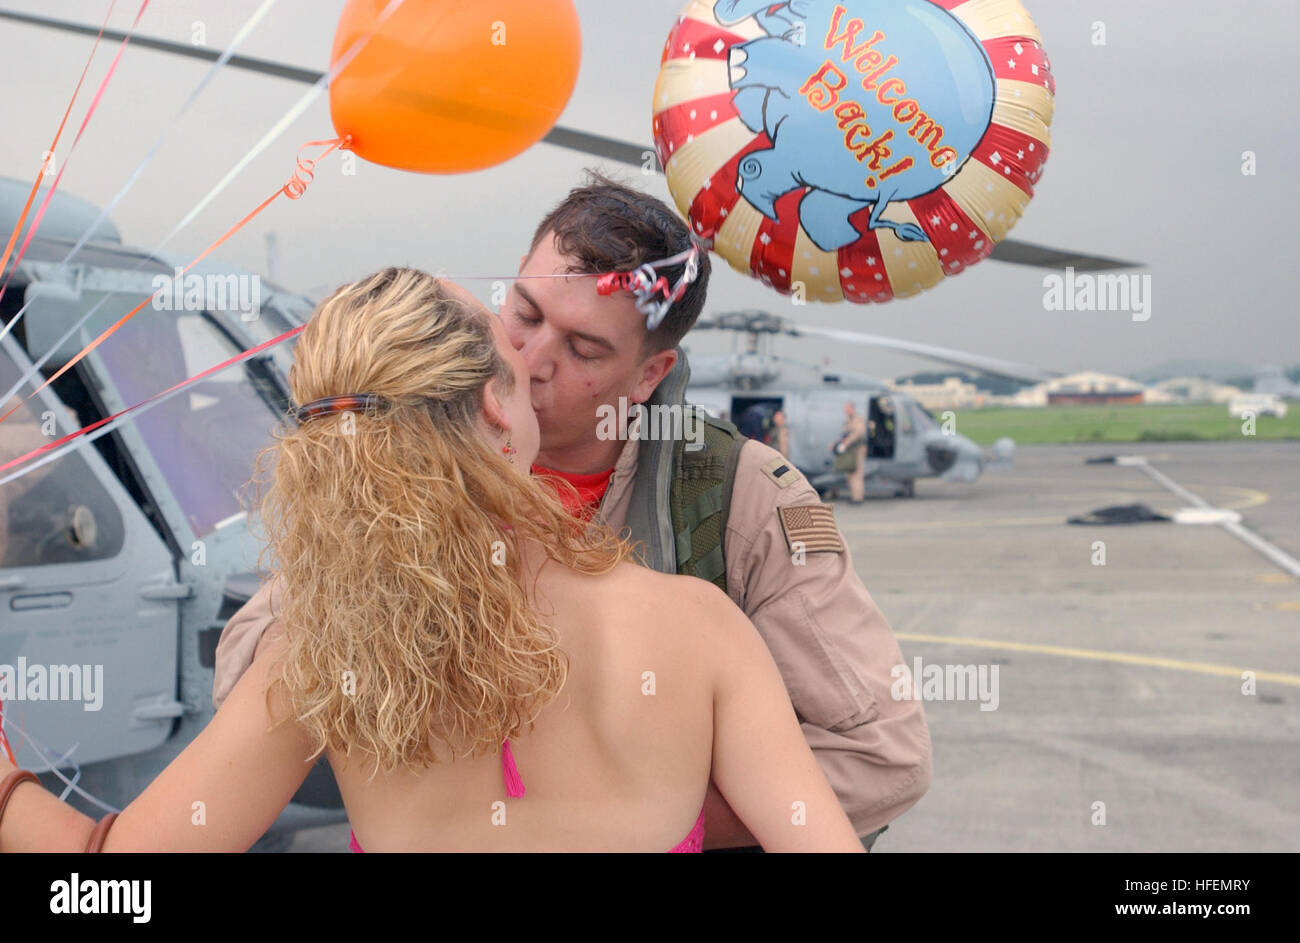 030725-N-7805K-002  Atsugi, Japan (July 25, 2003) -- Lt. j.g. Aaron Kemp is met on the flight line by his wife carrying 'Welcome Back' balloons during the homecoming celebration for the ÒWar LordsÓ of Helicopter Anti-Submarine Squadron Light Five One (HSL-51).  The ÒWar LordsÓ are returning from a six-month deployment in support of Operation Iraqi Freedom.  U.S. Navy photo by PhotographerÕs Mate 3rd Class Shaun Knittel.  (RELEASED) US Navy 030725-N-7805K-002 Lt. j.g. Aaron Kemp is met on the flight line by his wife carrying Welcome Back balloons during the homecoming celebration for the War Lo Stock Photo